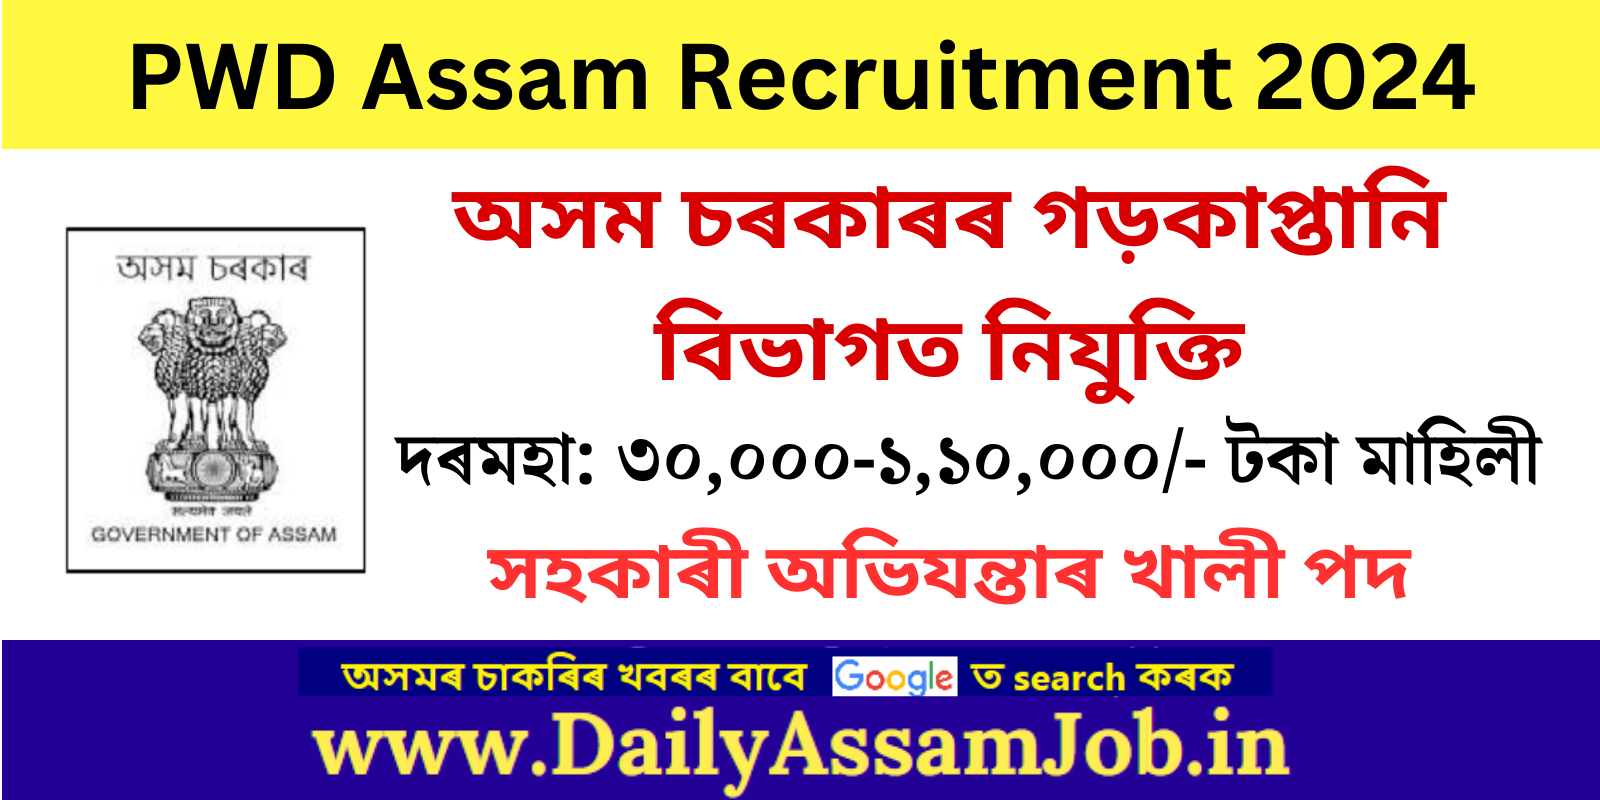 PWD Assam Recruitment 2024 for 18 AE (Mechanical) Vacancy